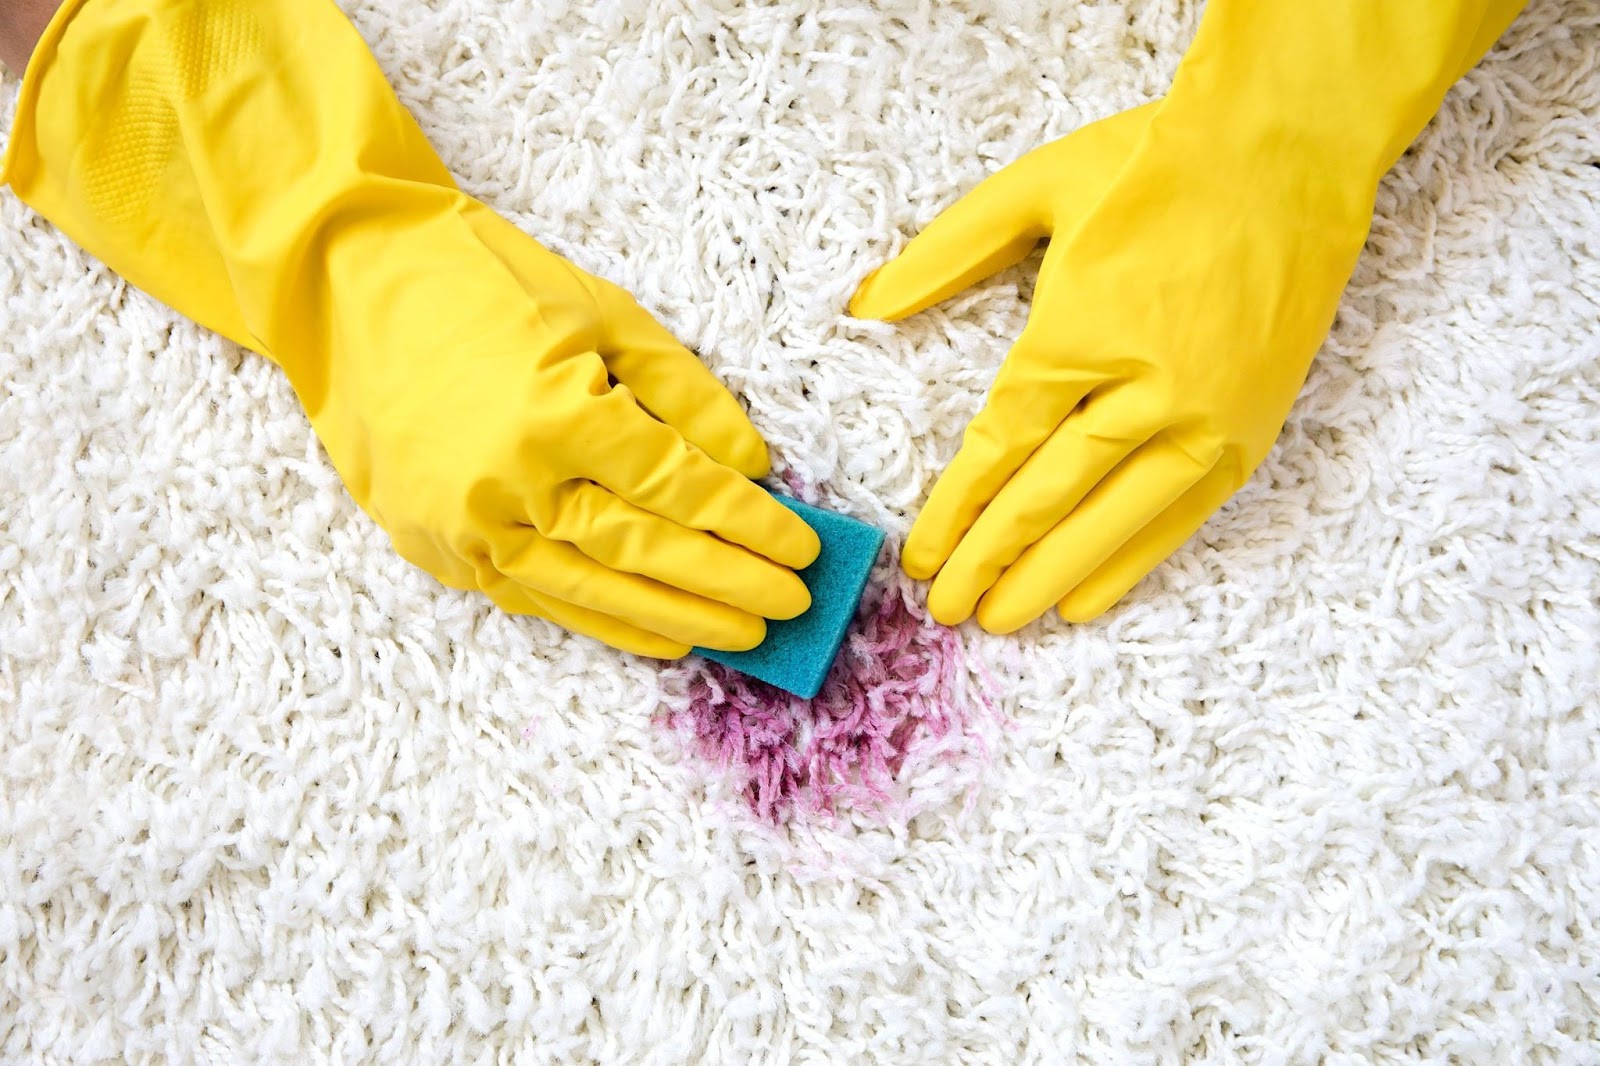 Adequate Home Remedies for Removing Old Stains from Carpet